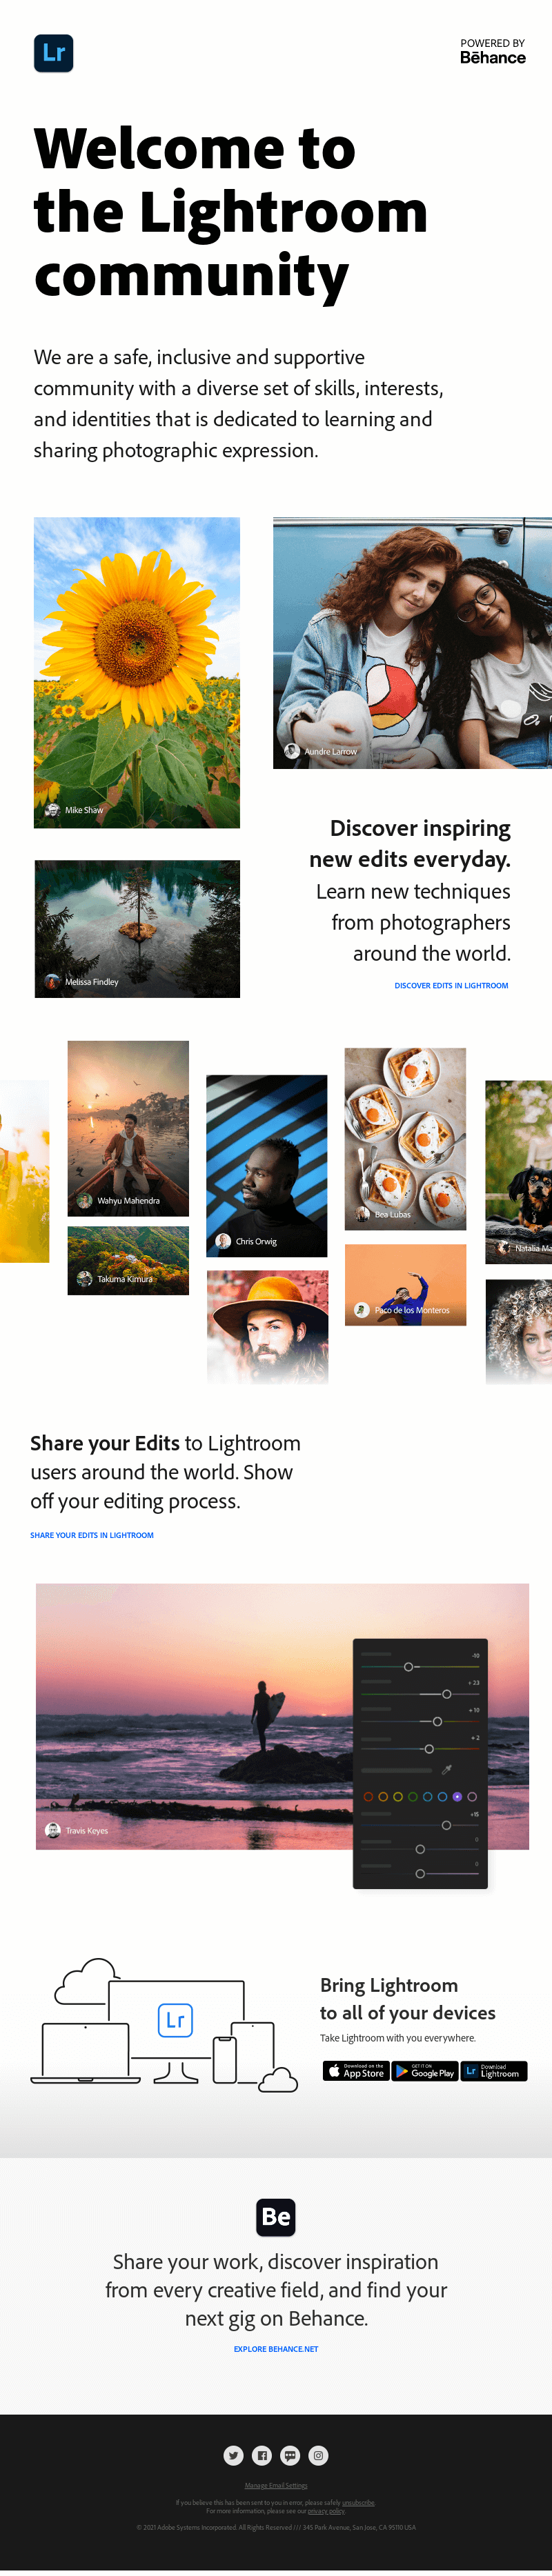 Welcome to the Lightroom community